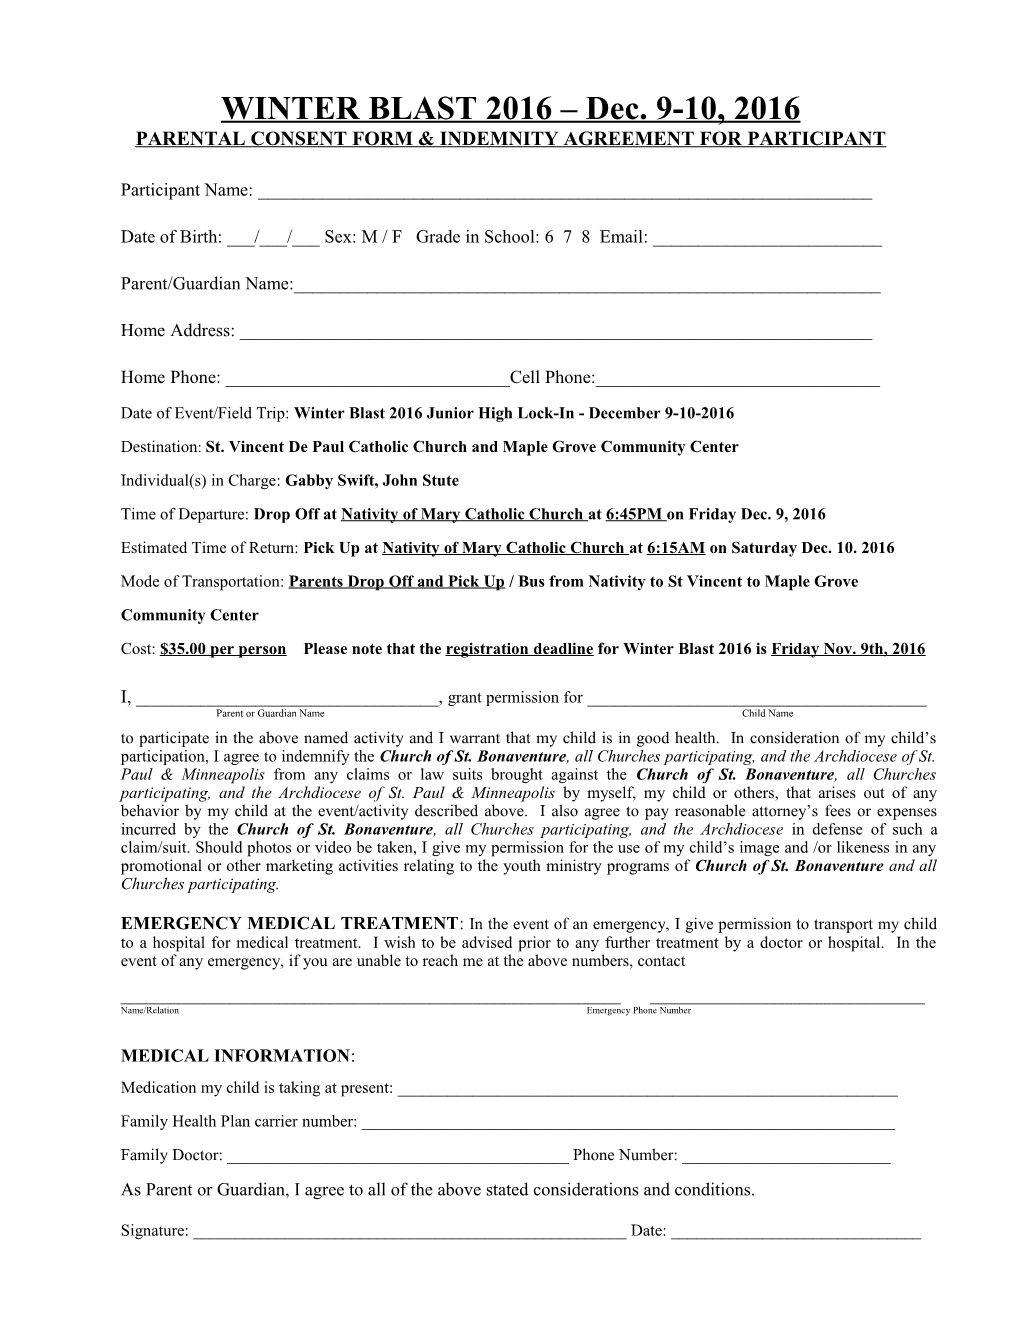 Parental Consent Form & Indemnity Agreement for Participant s1